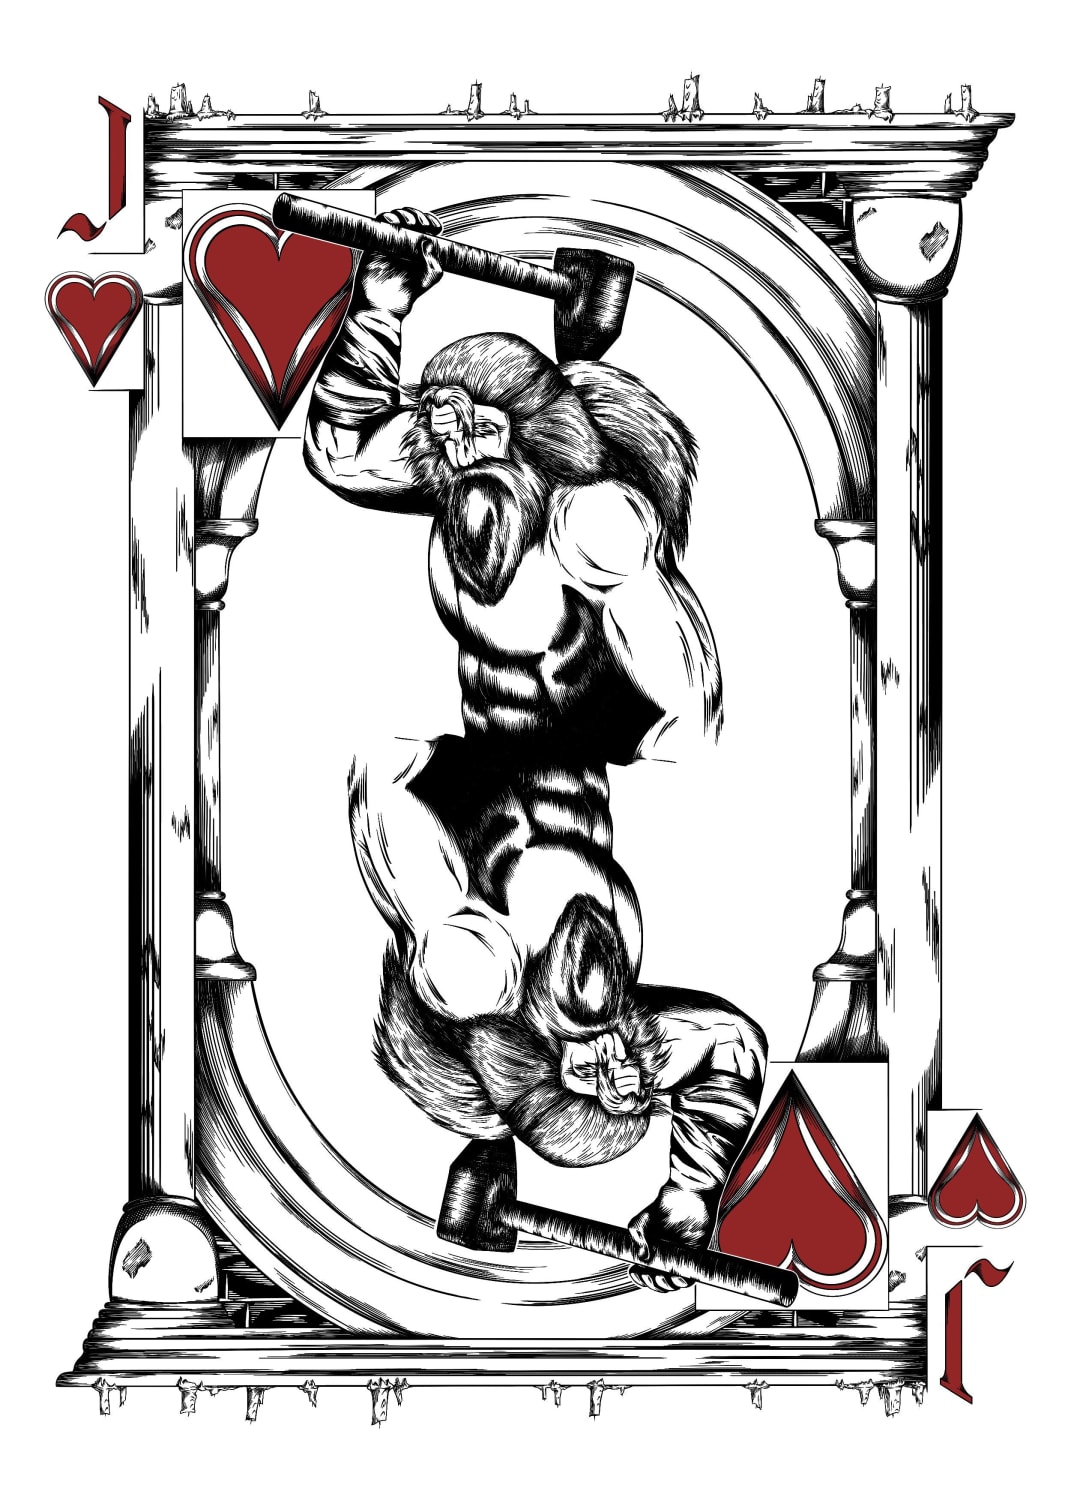 Andre of Astora, playing card collection